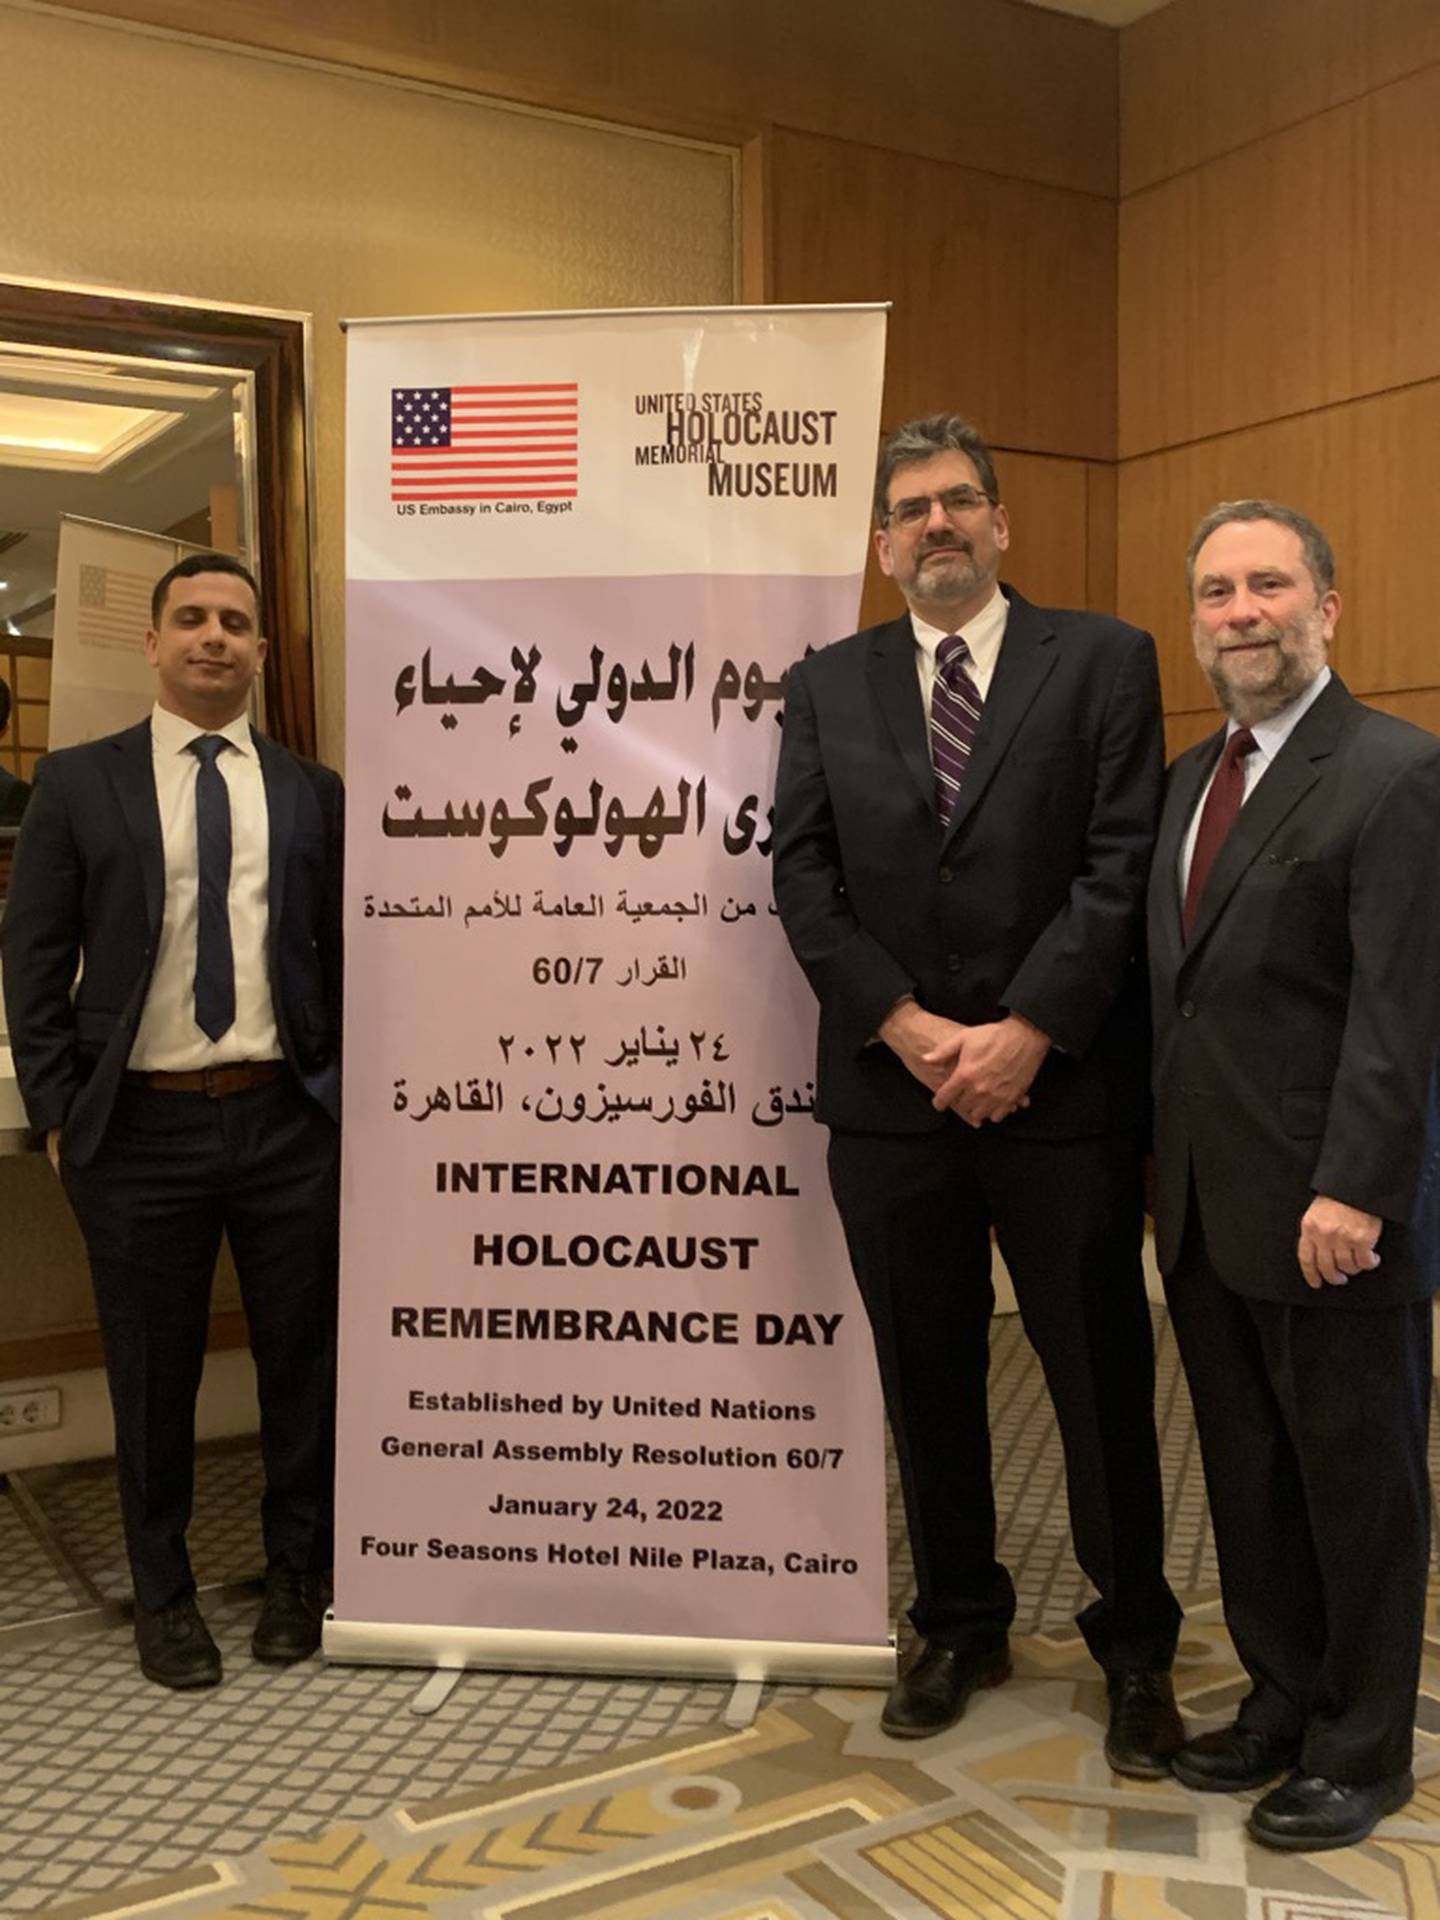 Attendees at an International Holocaust Remembrance Day event in Cairo. The event was co-sponsored by the US Embassy in Egypt and the US Holocaust Museum.